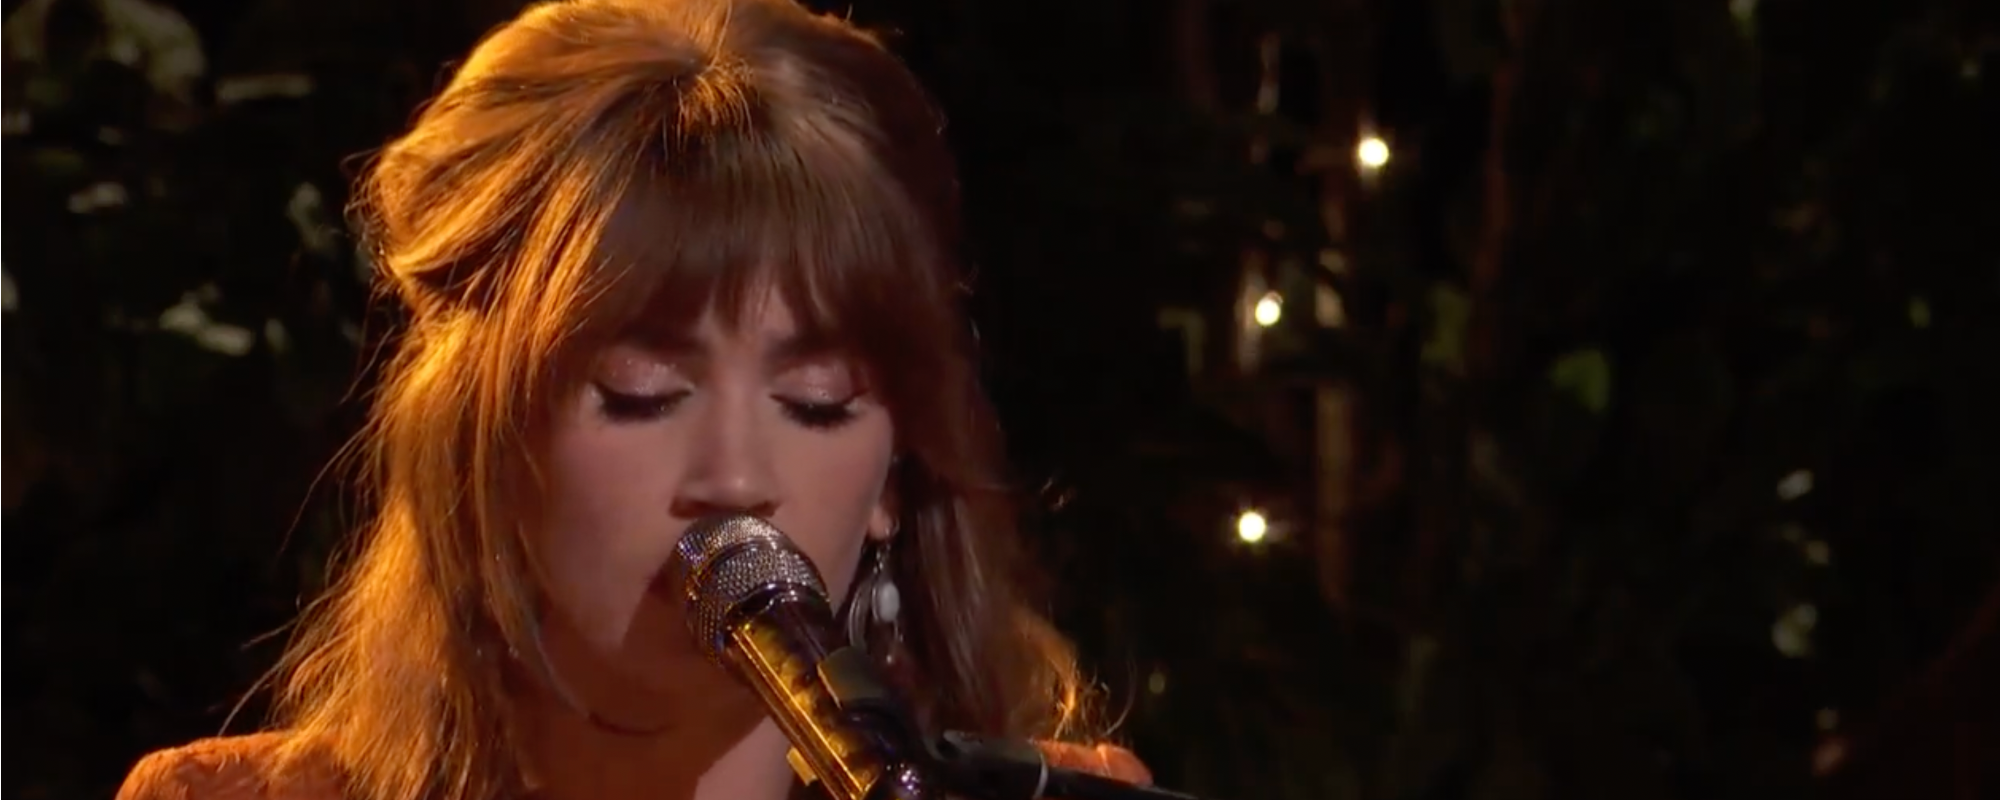 ‘The Voice’: Watch Lila Forde’s Show-Stopping Performance of Joni Mitchell’s “River”